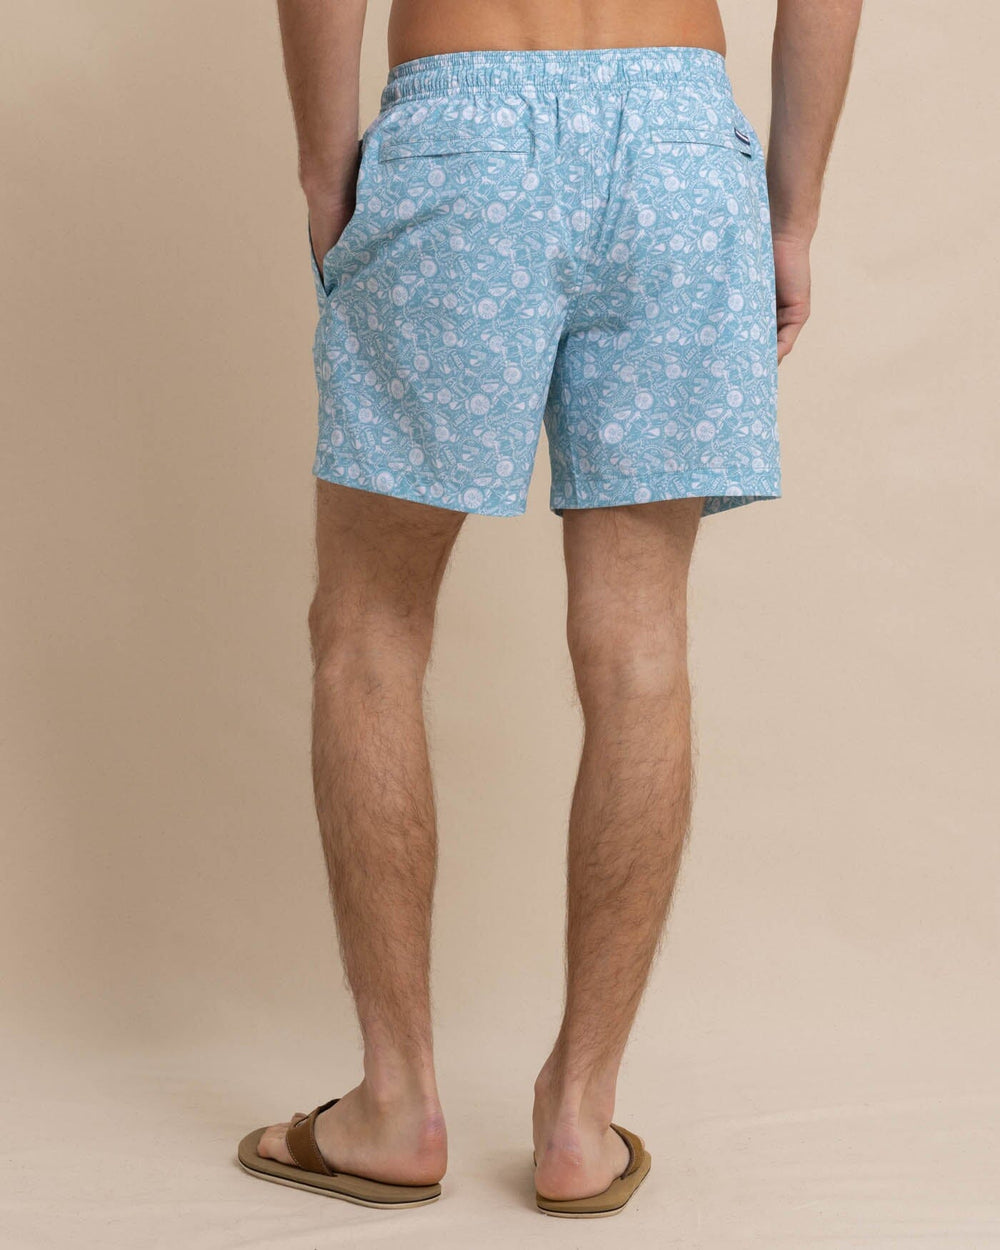 The back view of the Southern Tide Caps Off Swim Trunk by Southern Tide - Marine Blue